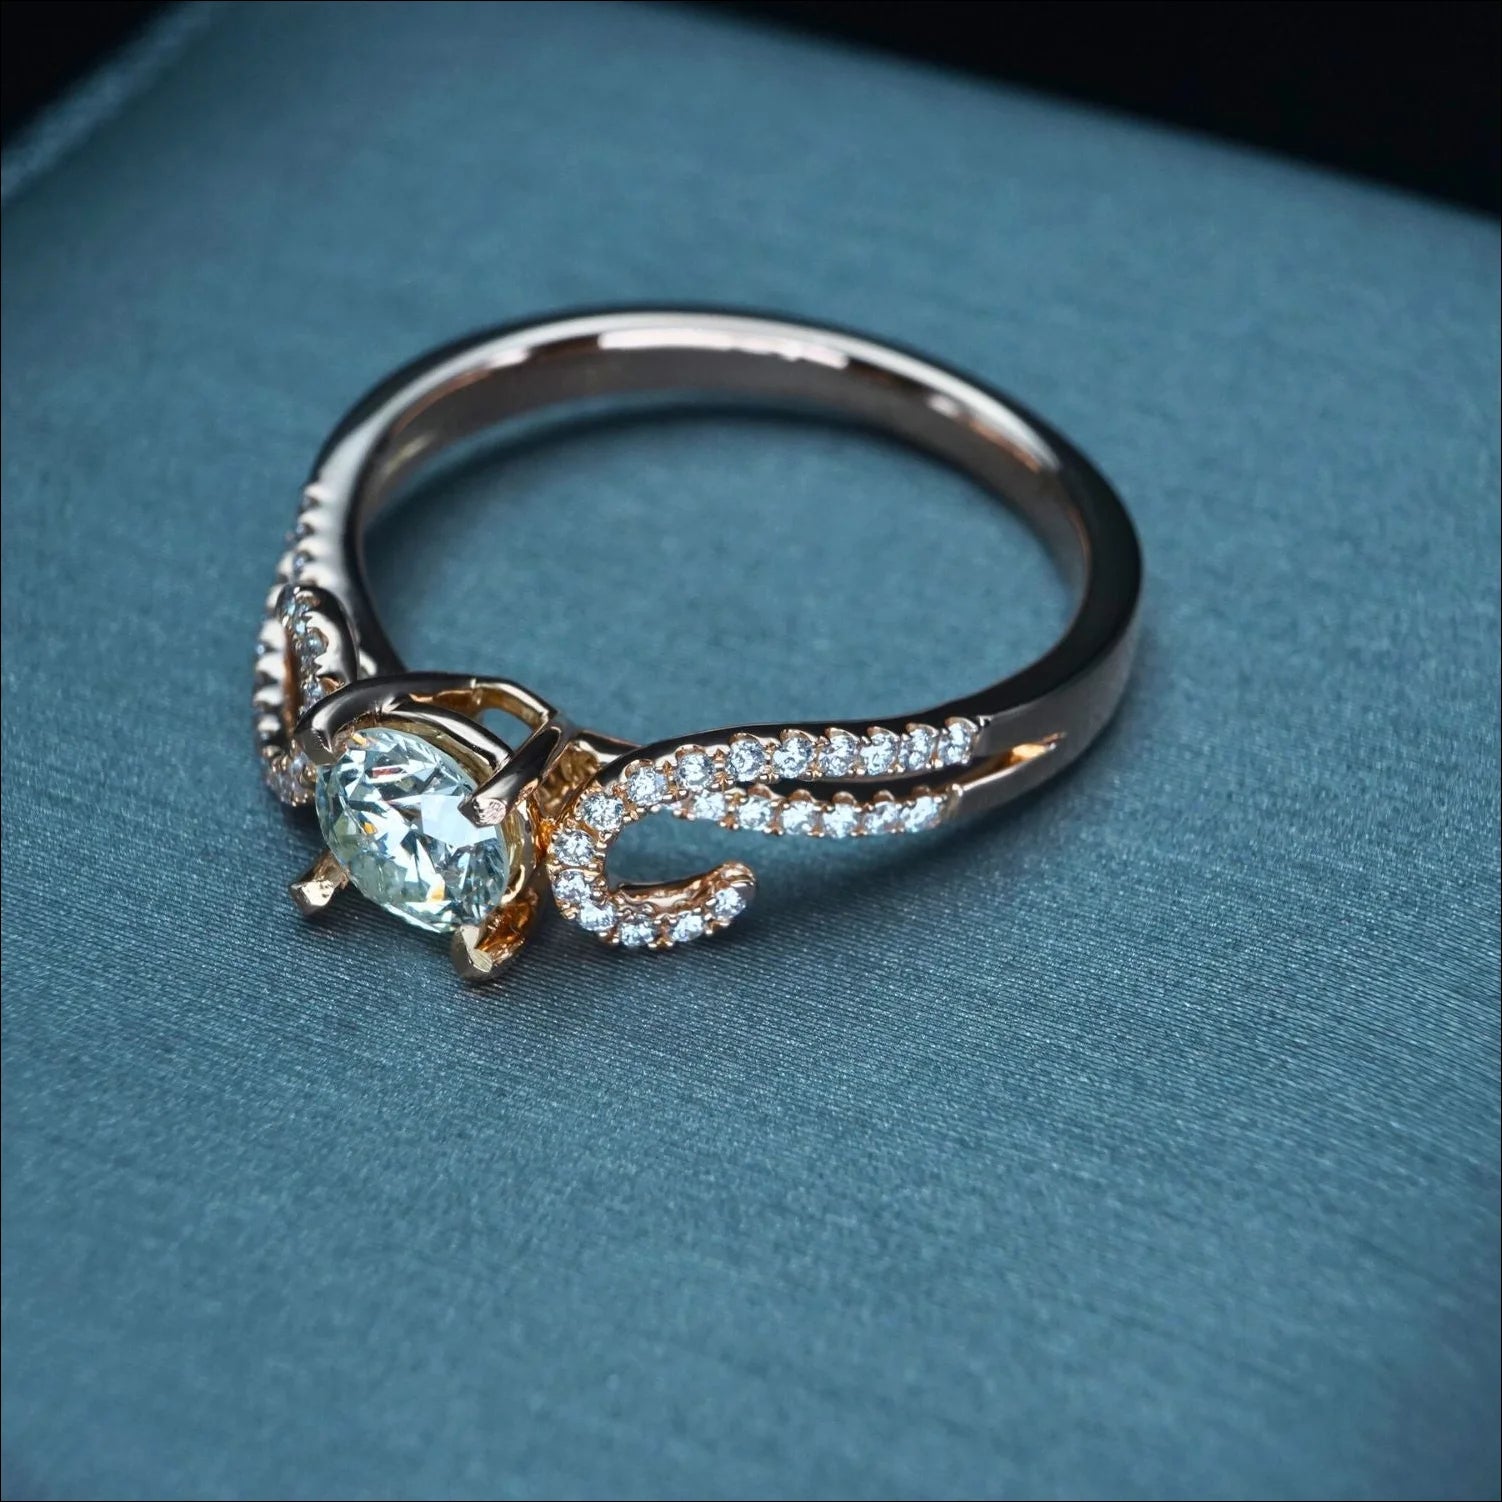 Romantic 18k Rose Gold Diamond Ring | Home page